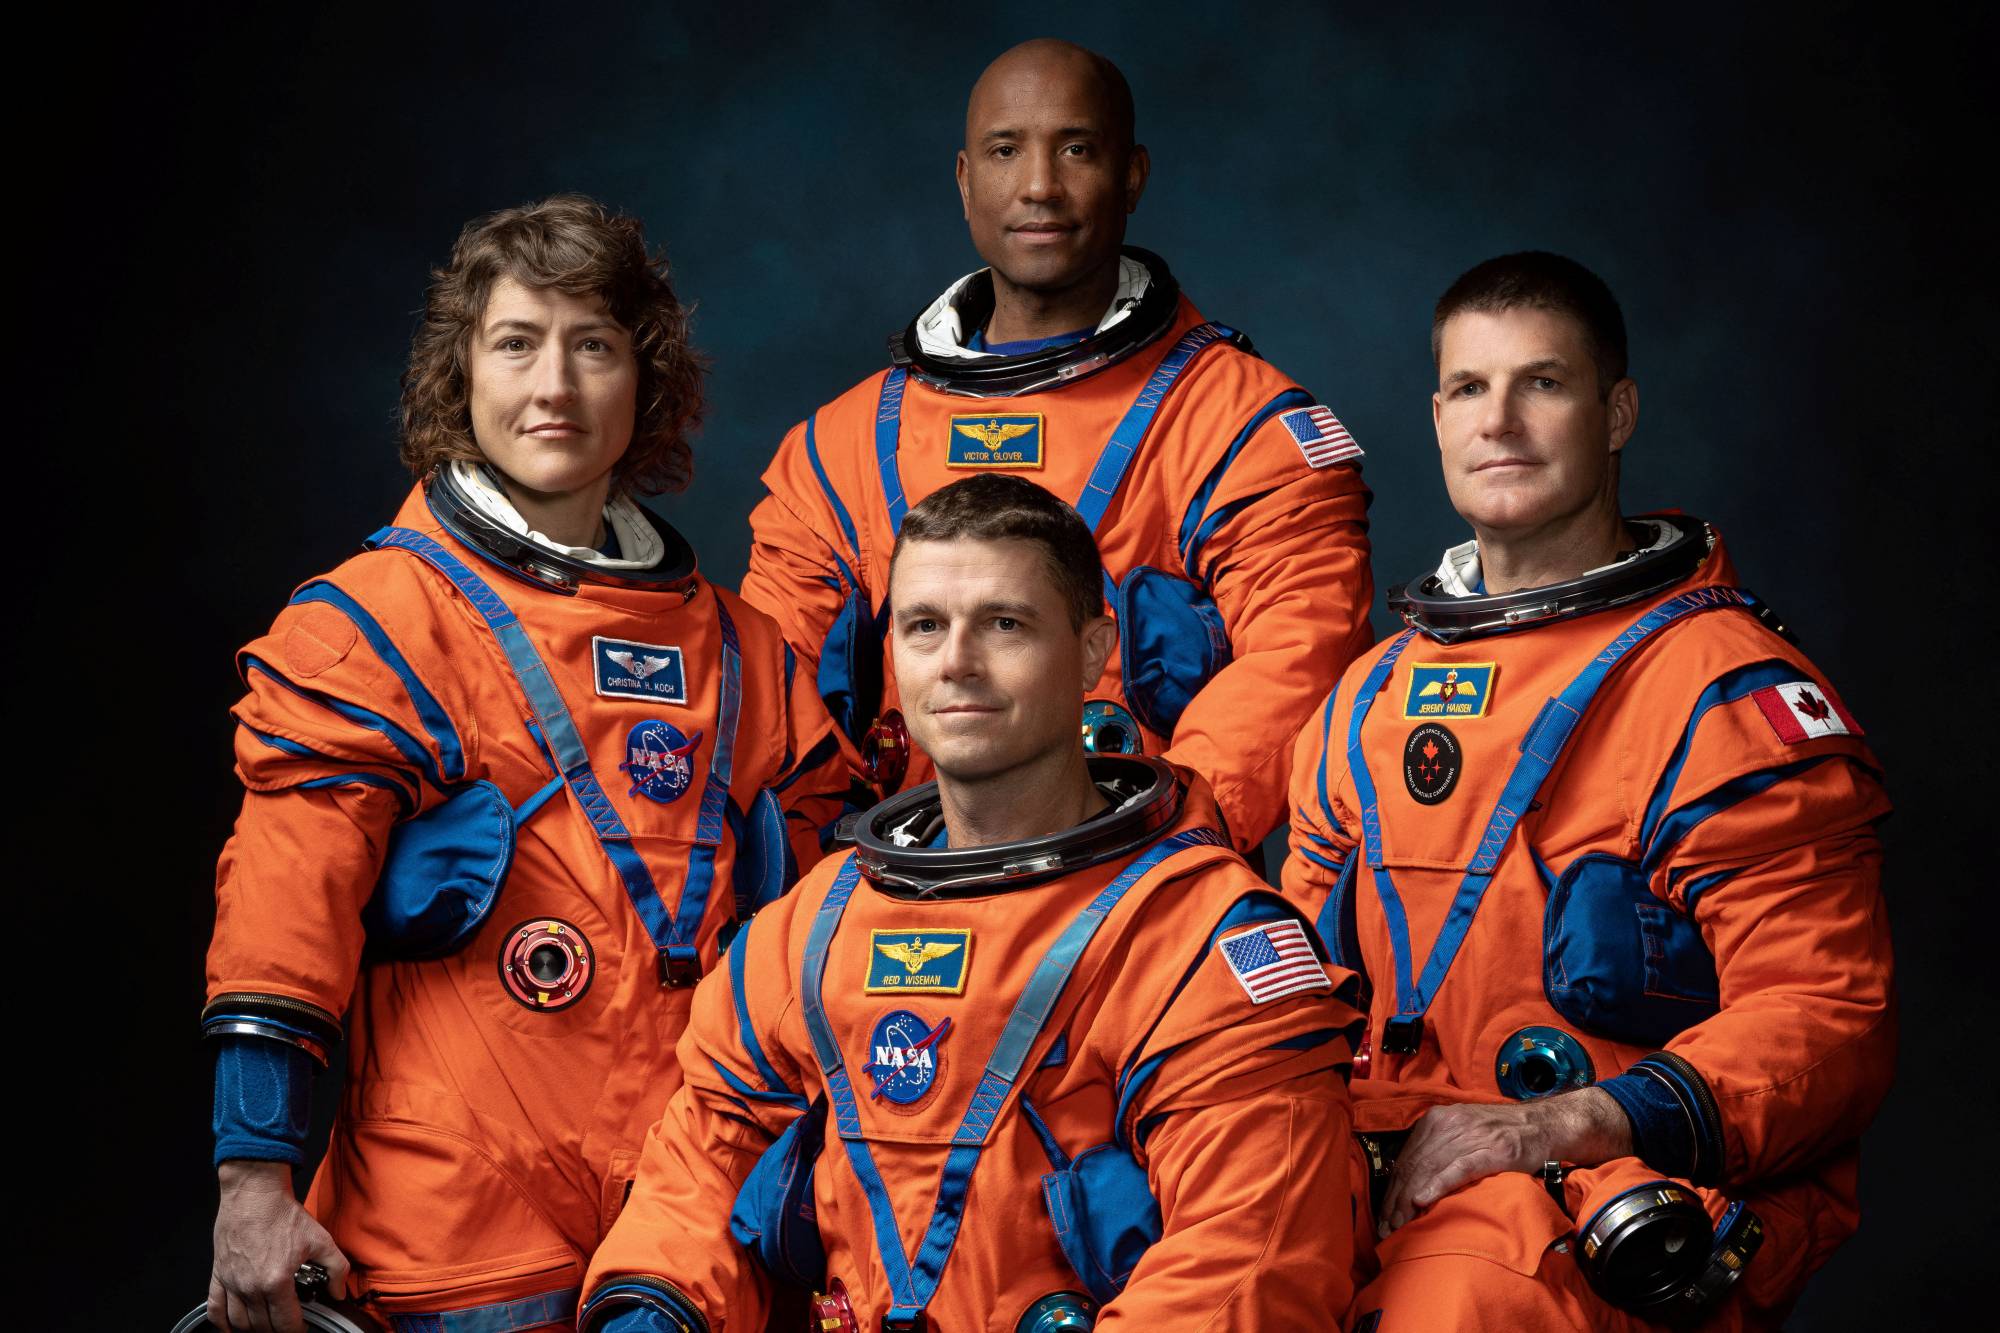 NASA astronauts Christina Koch, Victor Glover and Reid Wiseman and Canadian Space Agency astronaut Jeremy Hansen, the four-member team chosen for the Artemis II lunar flyby, pose wearing flight suits in Houston on Thursday. | NASA JOHNSON SPACE CENTER / VIA REUTERS 